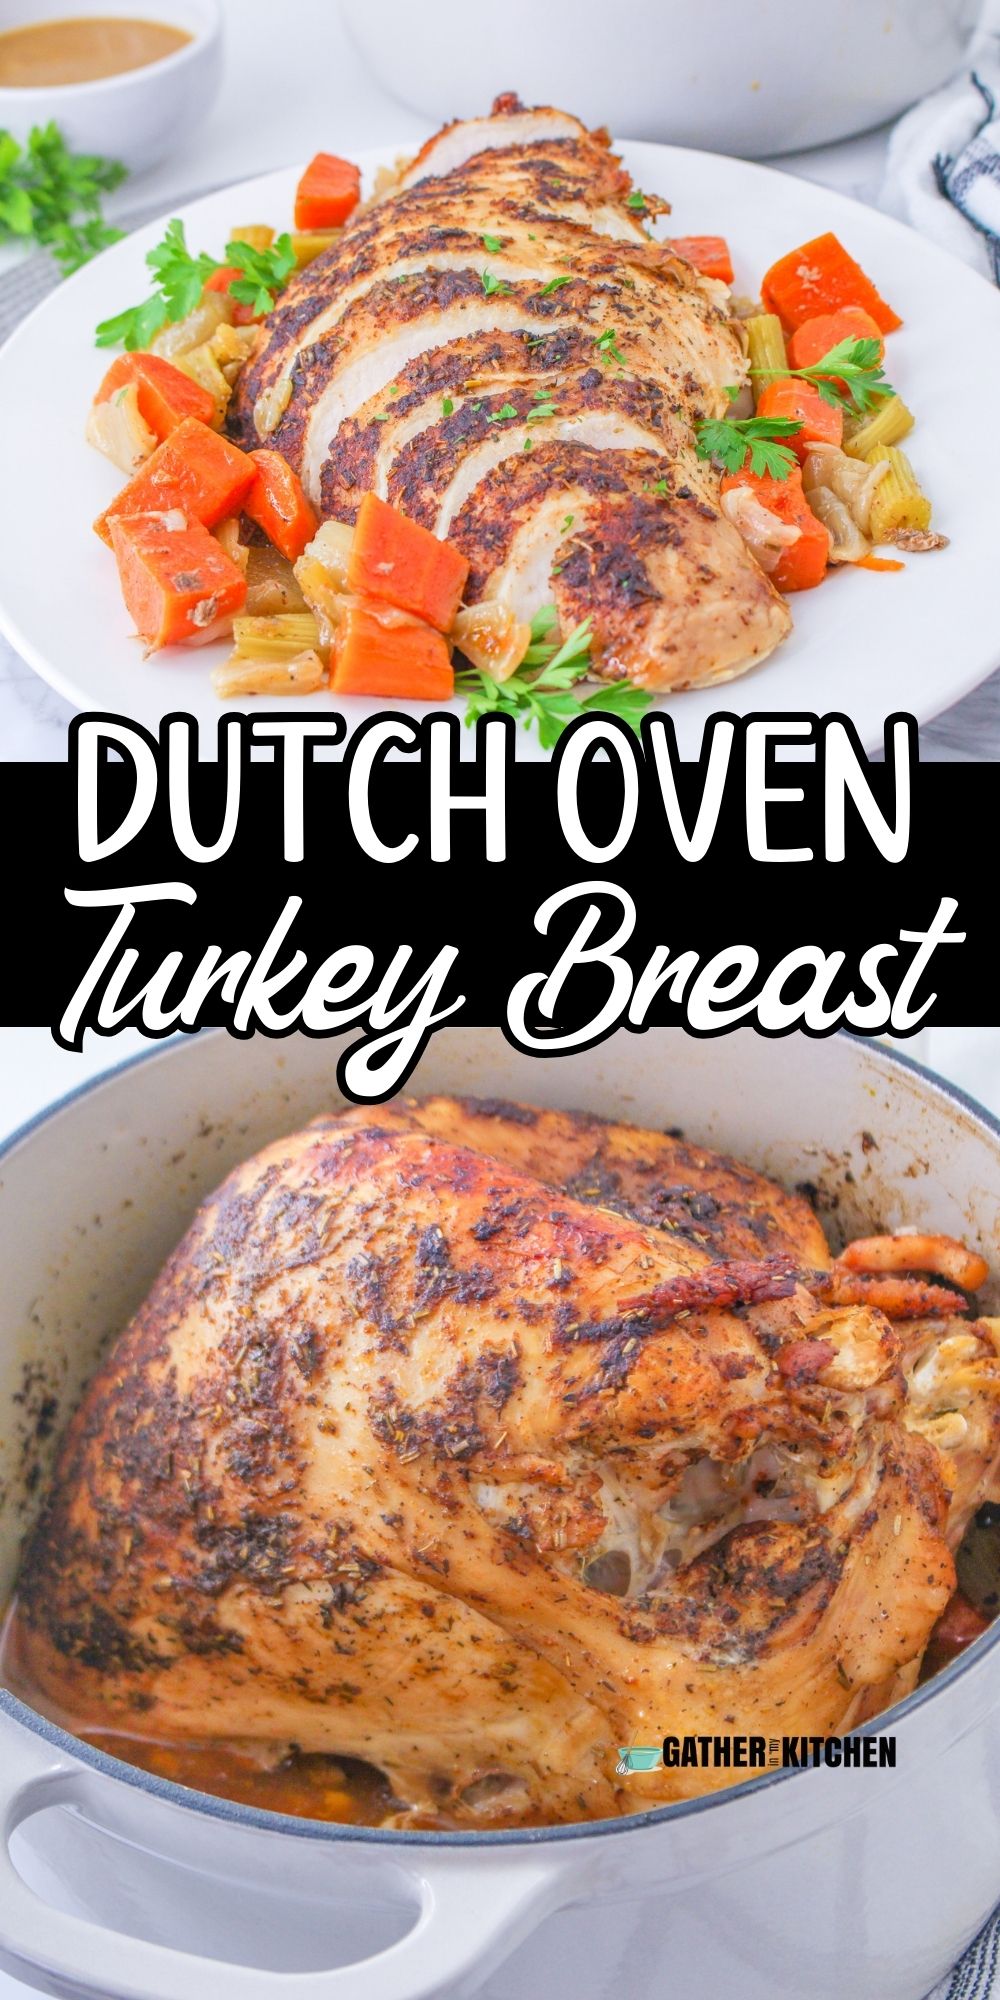 Pin image: top is a plate of Dutch Oven Turkey Breast, middle says "Dutch Oven Turkey Breast and bottom is a turkey in a casserole dish.